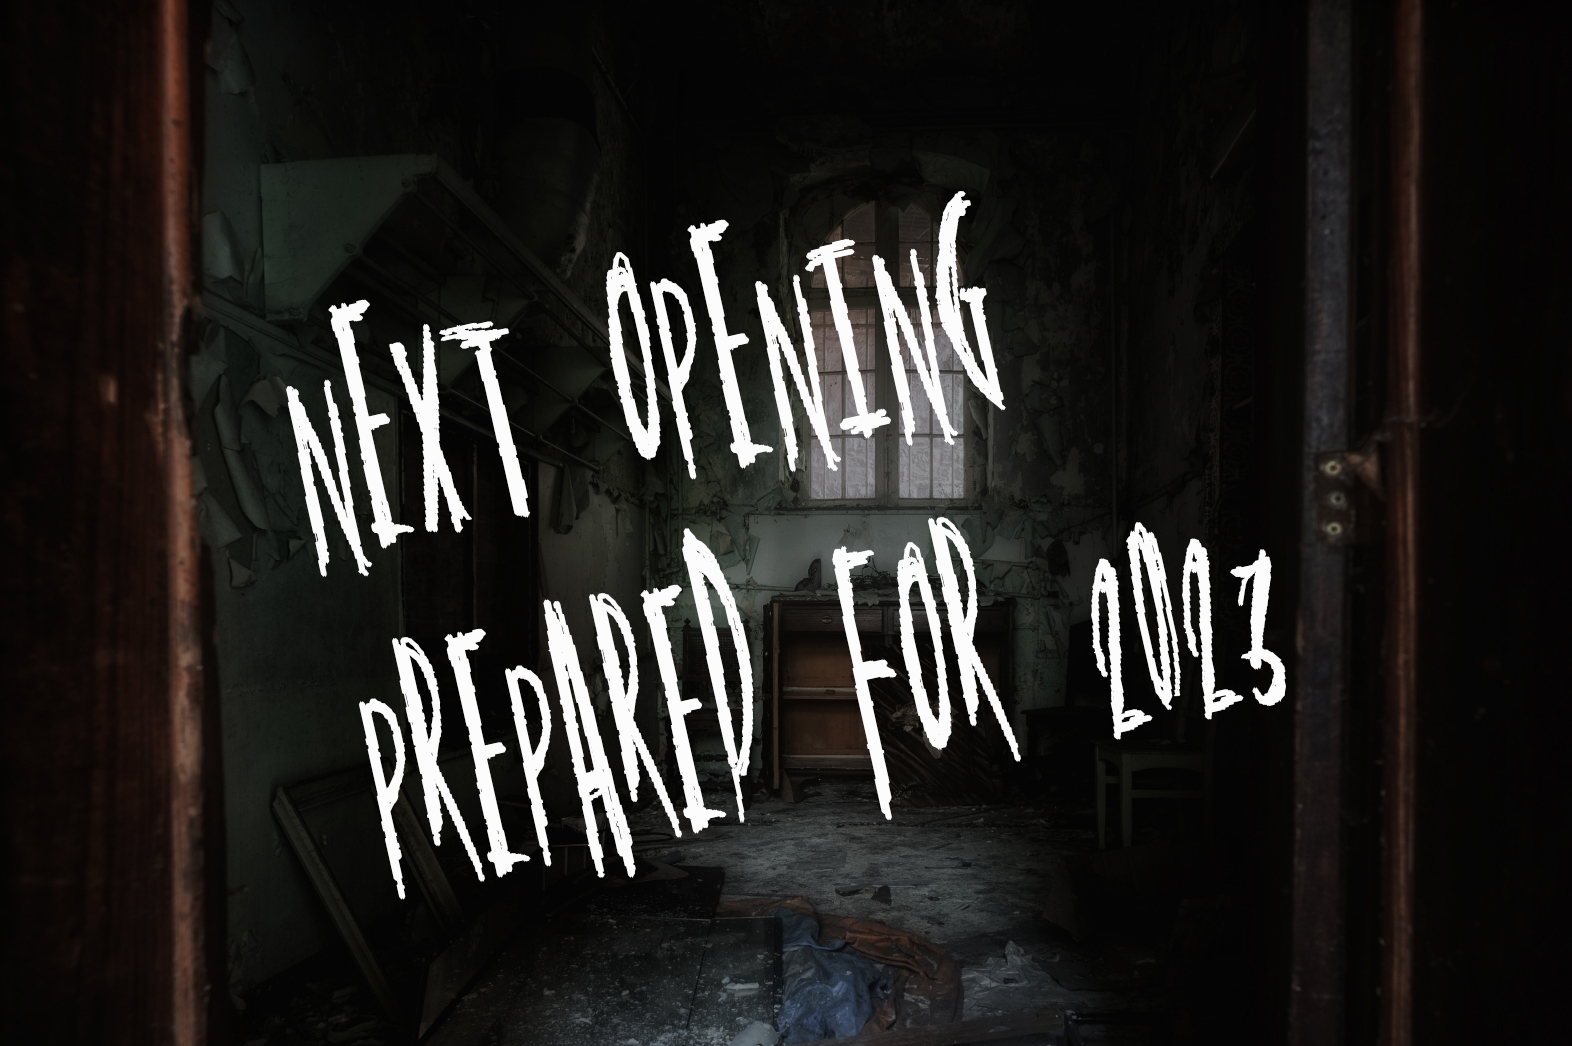 Next opening prepared for 2023